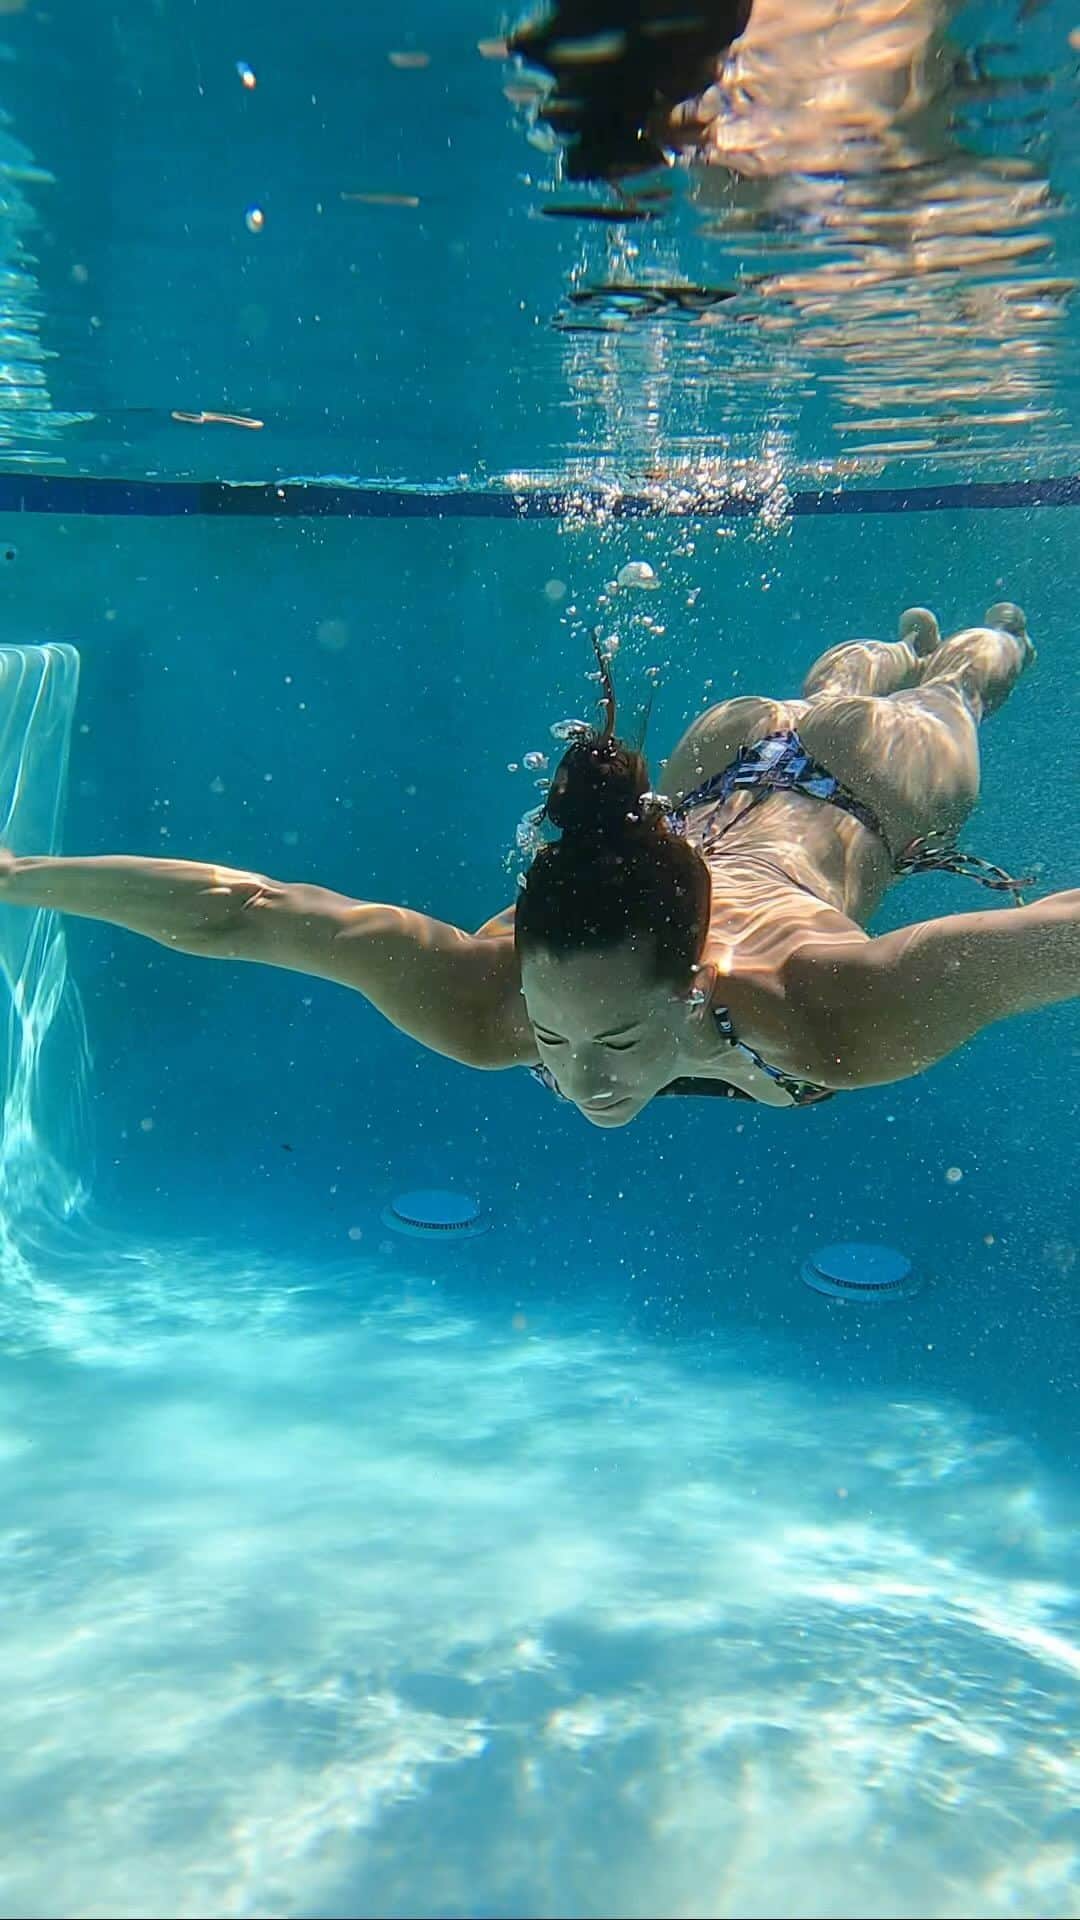 Janna Breslinのインスタグラム：「Rumor has it I’m still swimming… 😂  Lol, but hey, I’m about to get real for a second. There have been many moments recently where I’ve felt like the currents have been too tough to swim through…  All I wanted to do was throw in the towel and come up for air.   But it’s in moments like this where I remind myself that I CAN swim… and I’m actually a damn strong swimmer at that!  I may have to hold my breath for a little longer, or paddle a bit harder, but I always make it to the other side.  So this is your reminder to just keep swimming.  If I can do it, so can you. Whatever it is, you’ve got this ❤️  #GTFOutside #EarnYourFreedom #swimming #motivation」